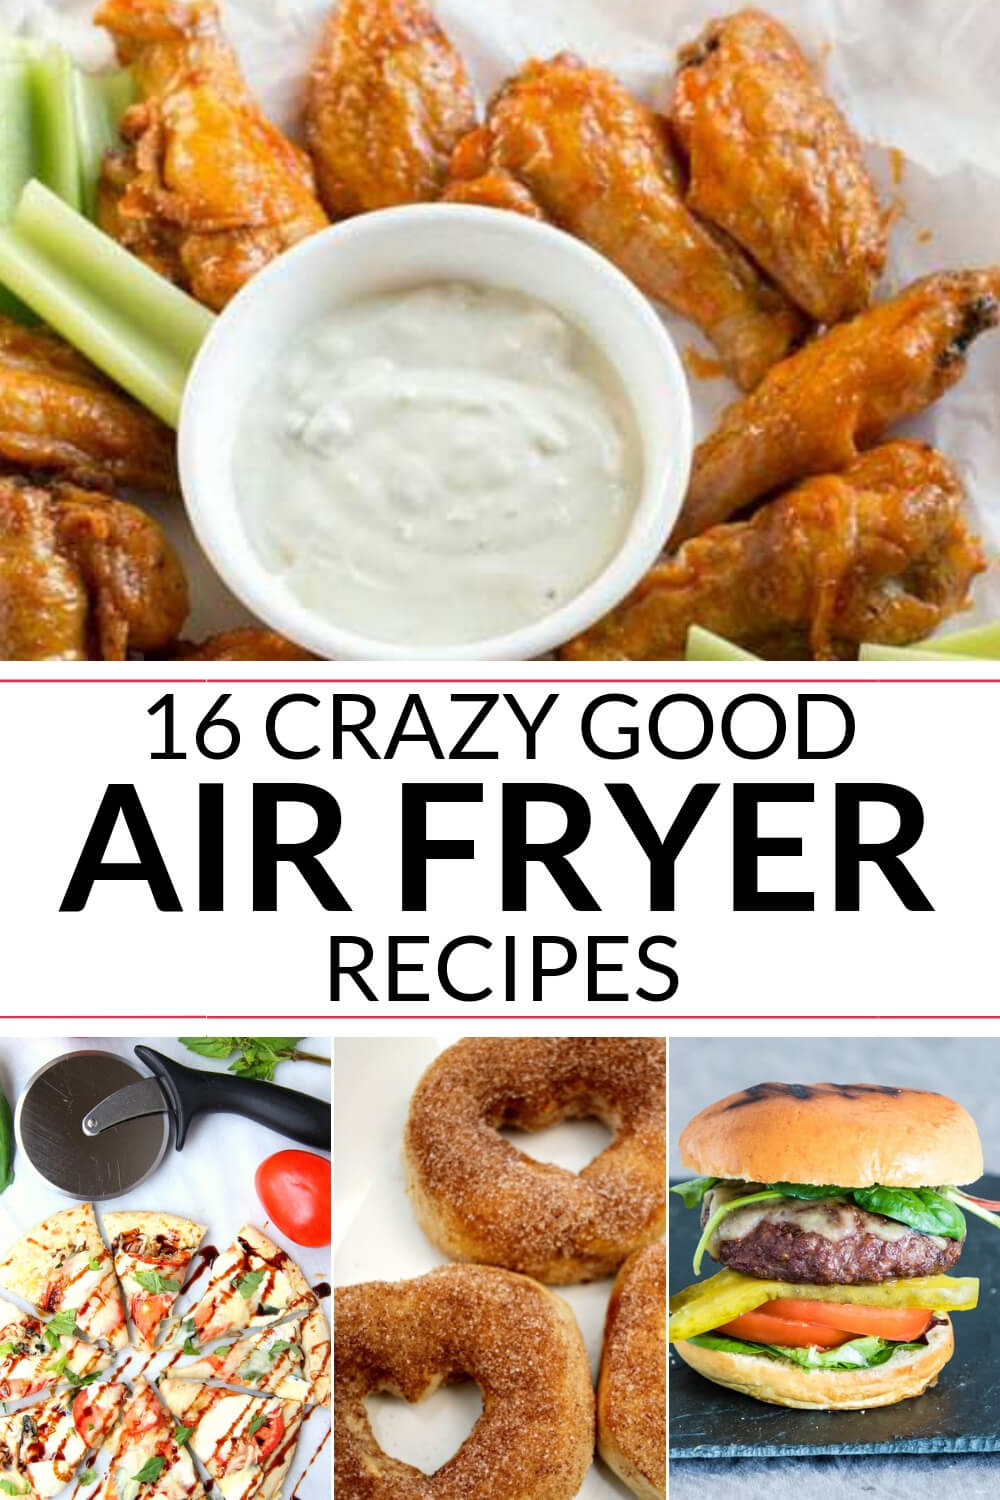 A collection of air fryer recipes including wings, pizza, donuts and burgers